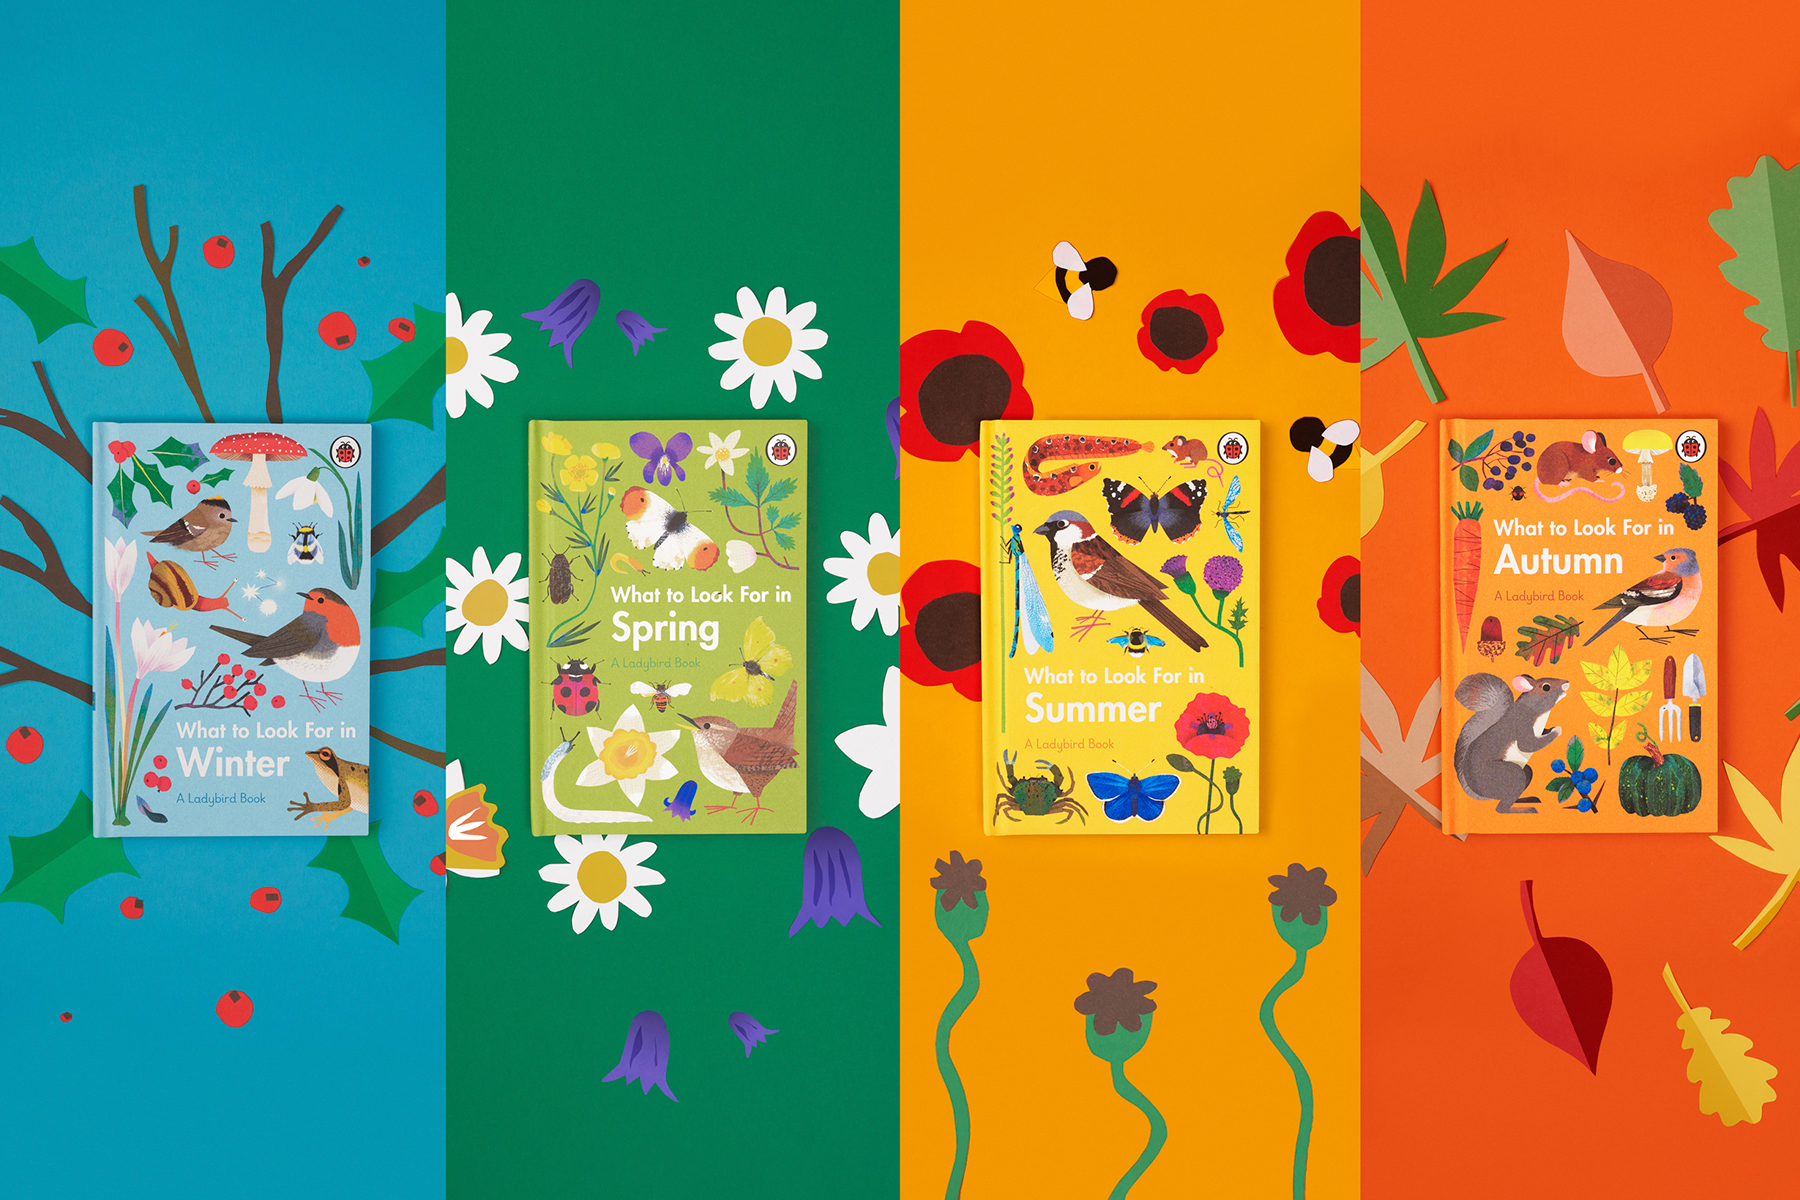 The four redesigned covers of the 'What to Look For' nature book series